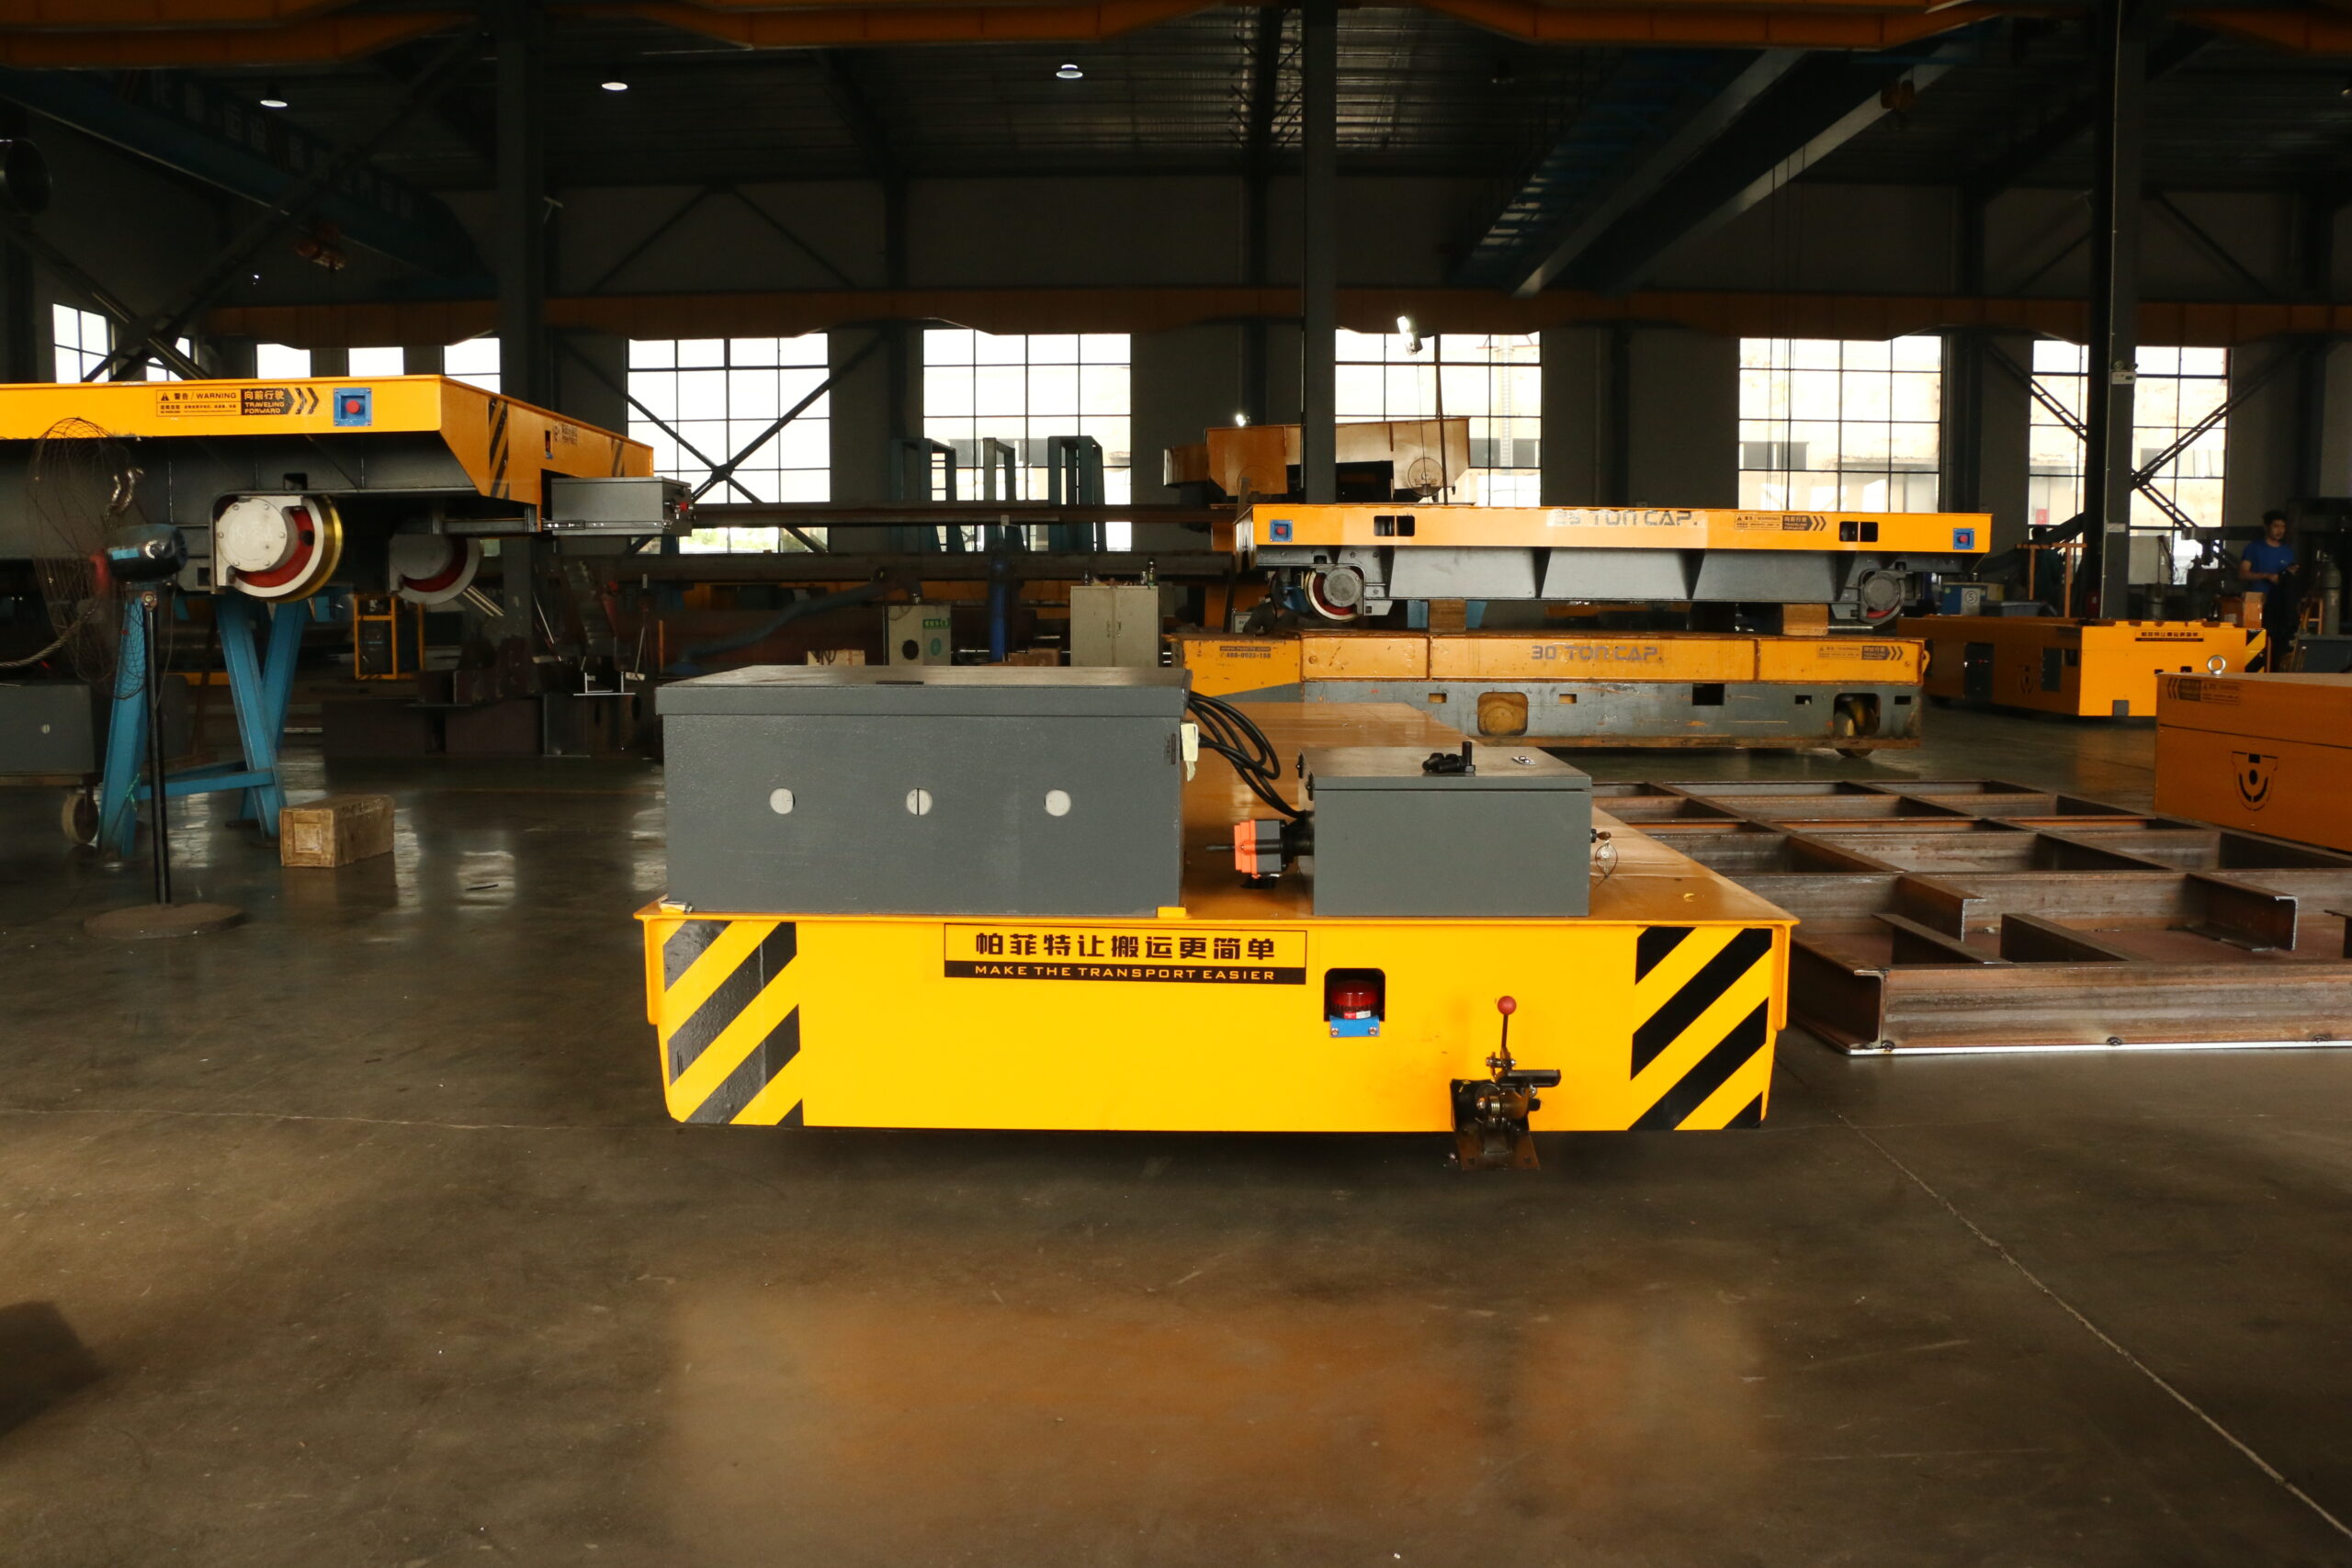 20ml headspace vialLoad Transfer Vehicles Handling 1-300 Tons of Material